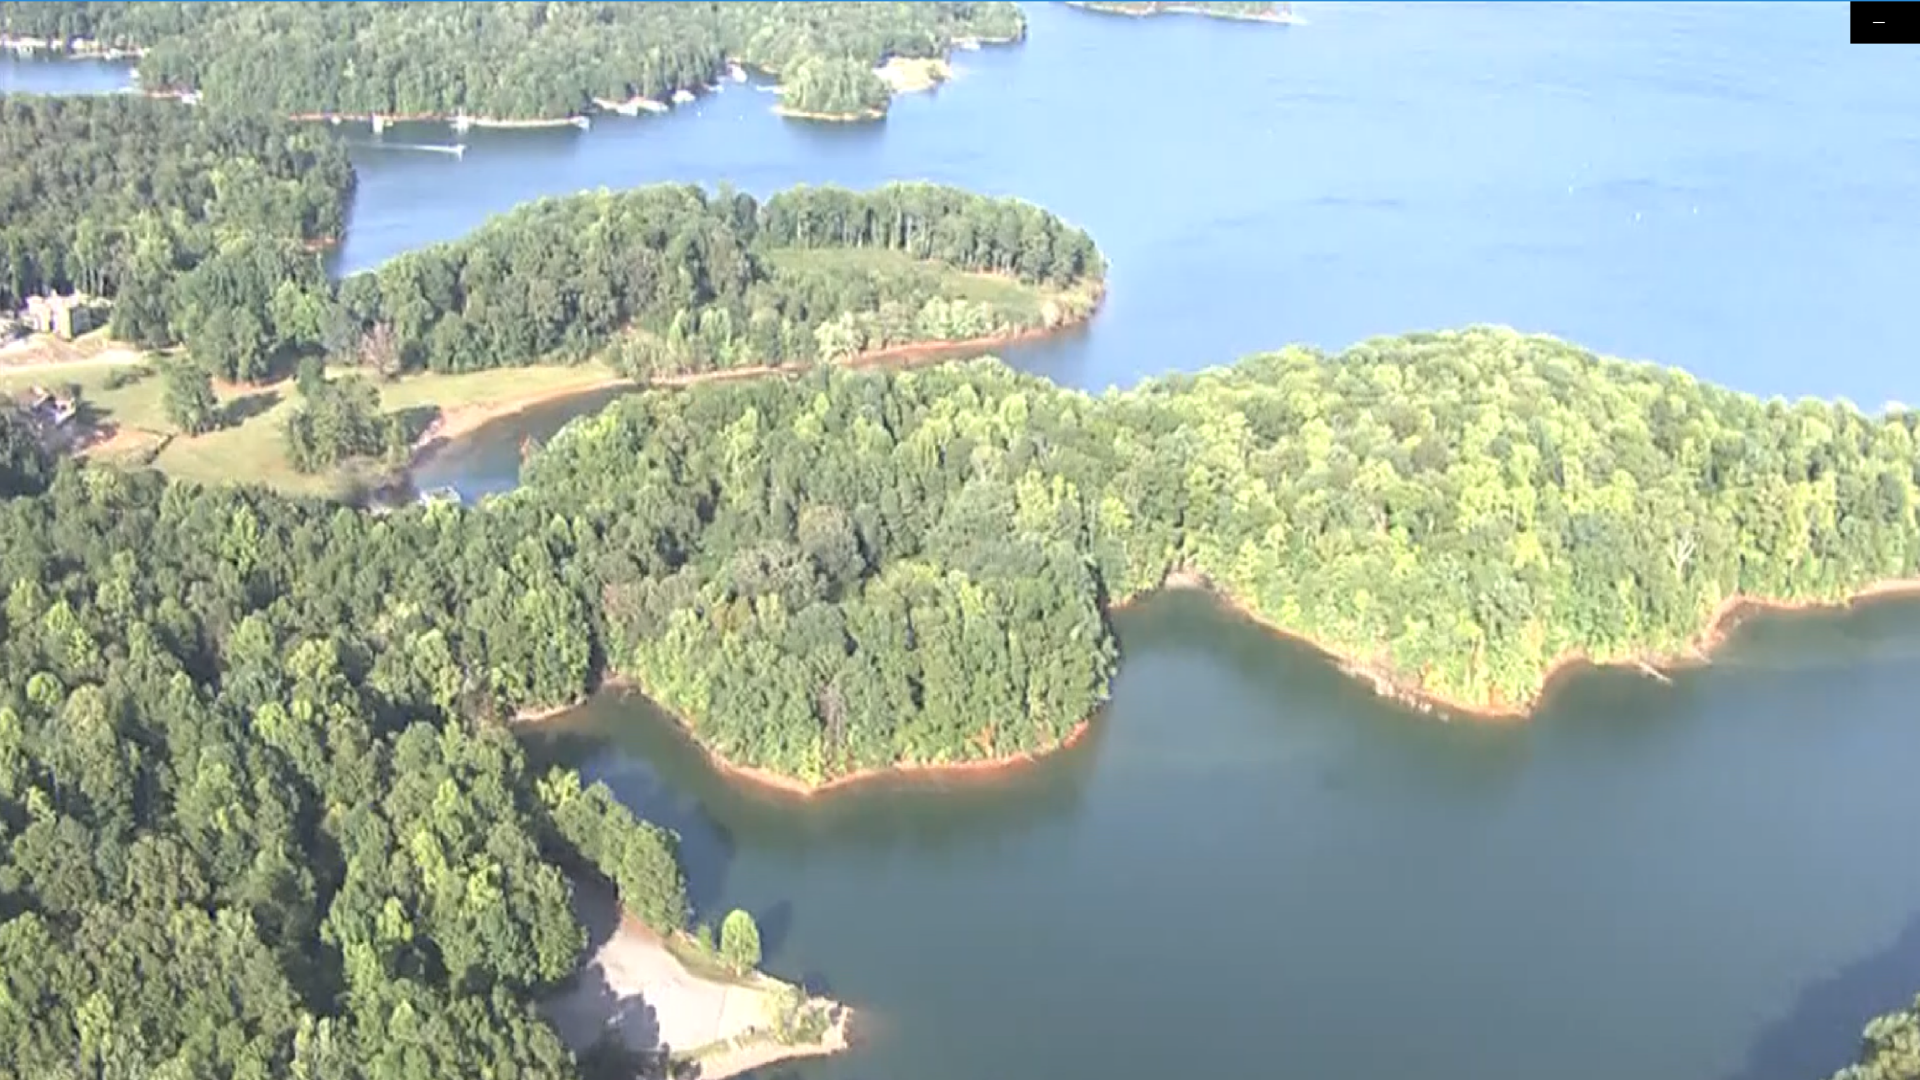 Forsyth Co. residents claim local development could cause environmental impacts.